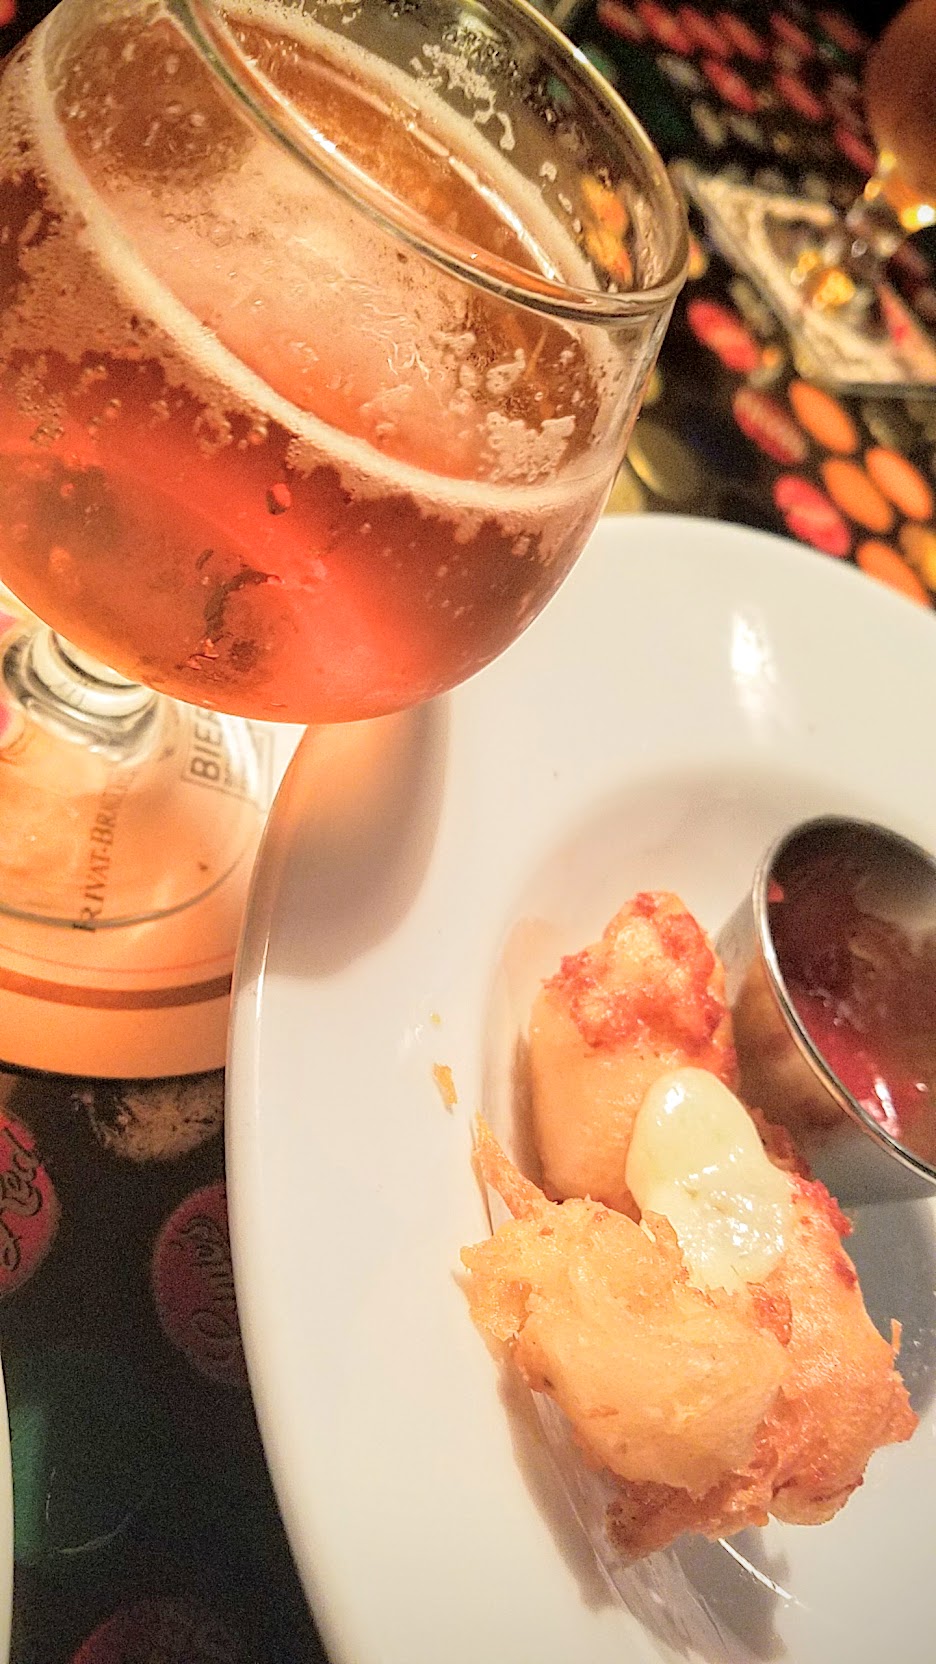 Example Food at Saraveza Fried Cheese Curds, a perfect pairing with beer every time